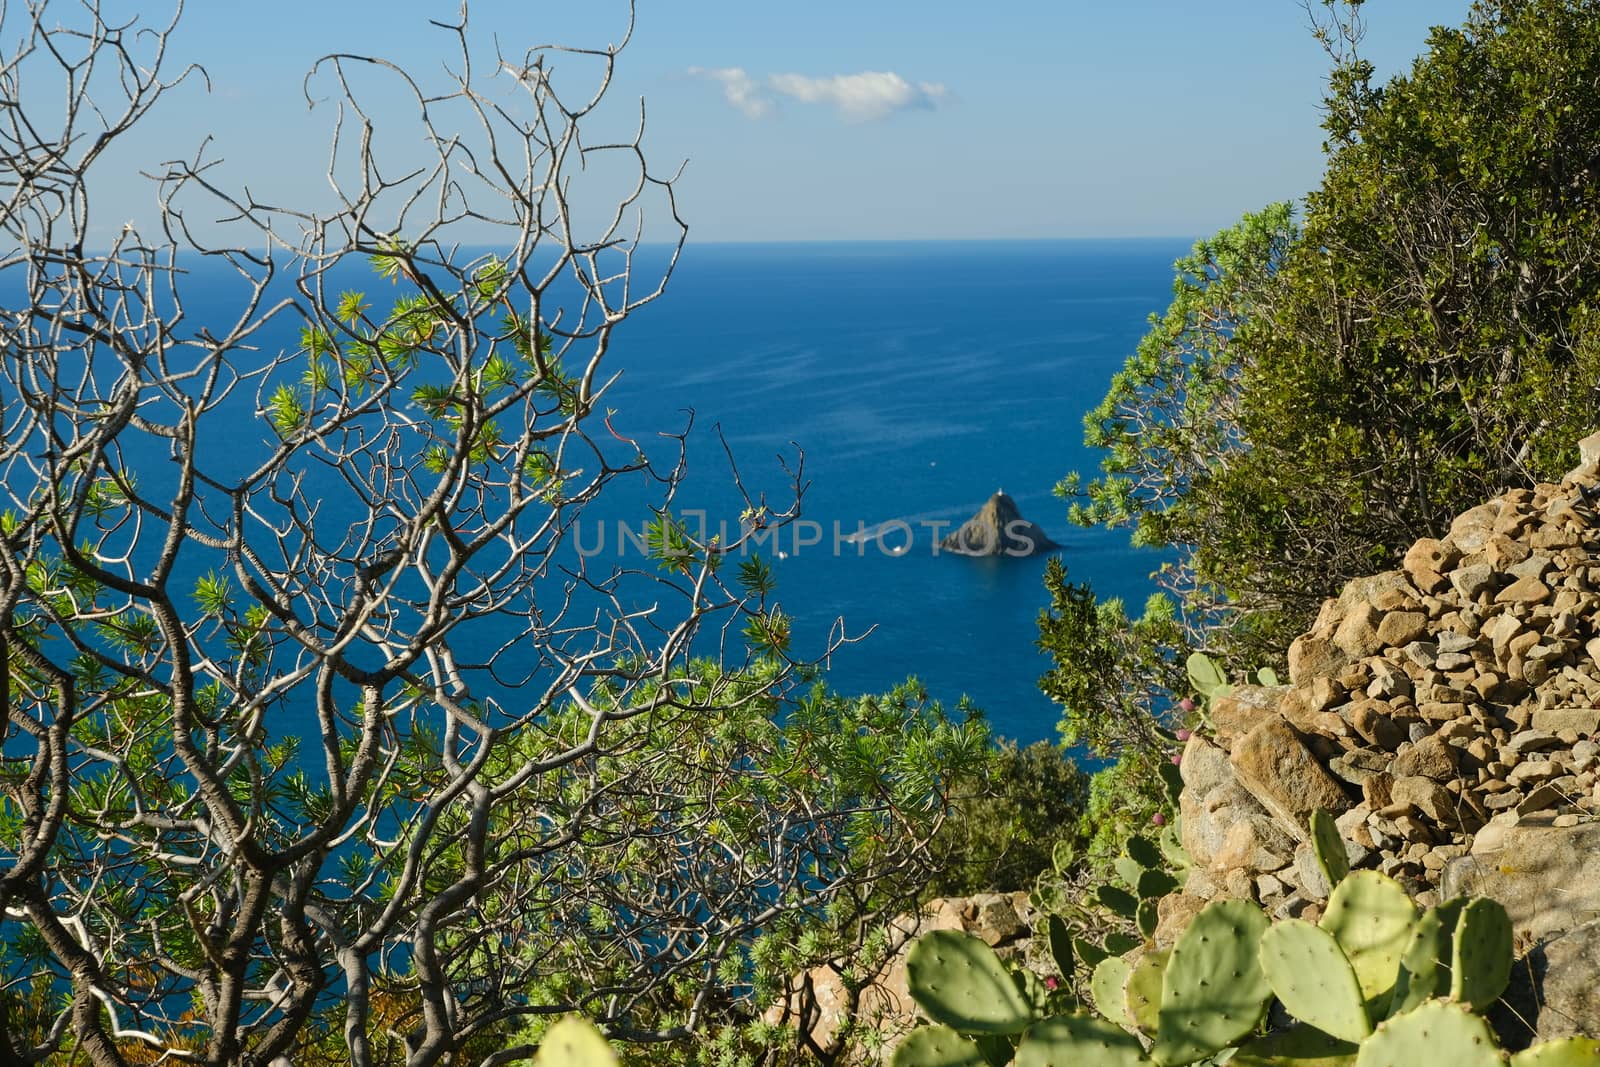 Ferale rock in the Cinque Terre sea in Liguria. Bushes of Euphorbia, plant of Mediterranean vegetation that grows on rocks.
